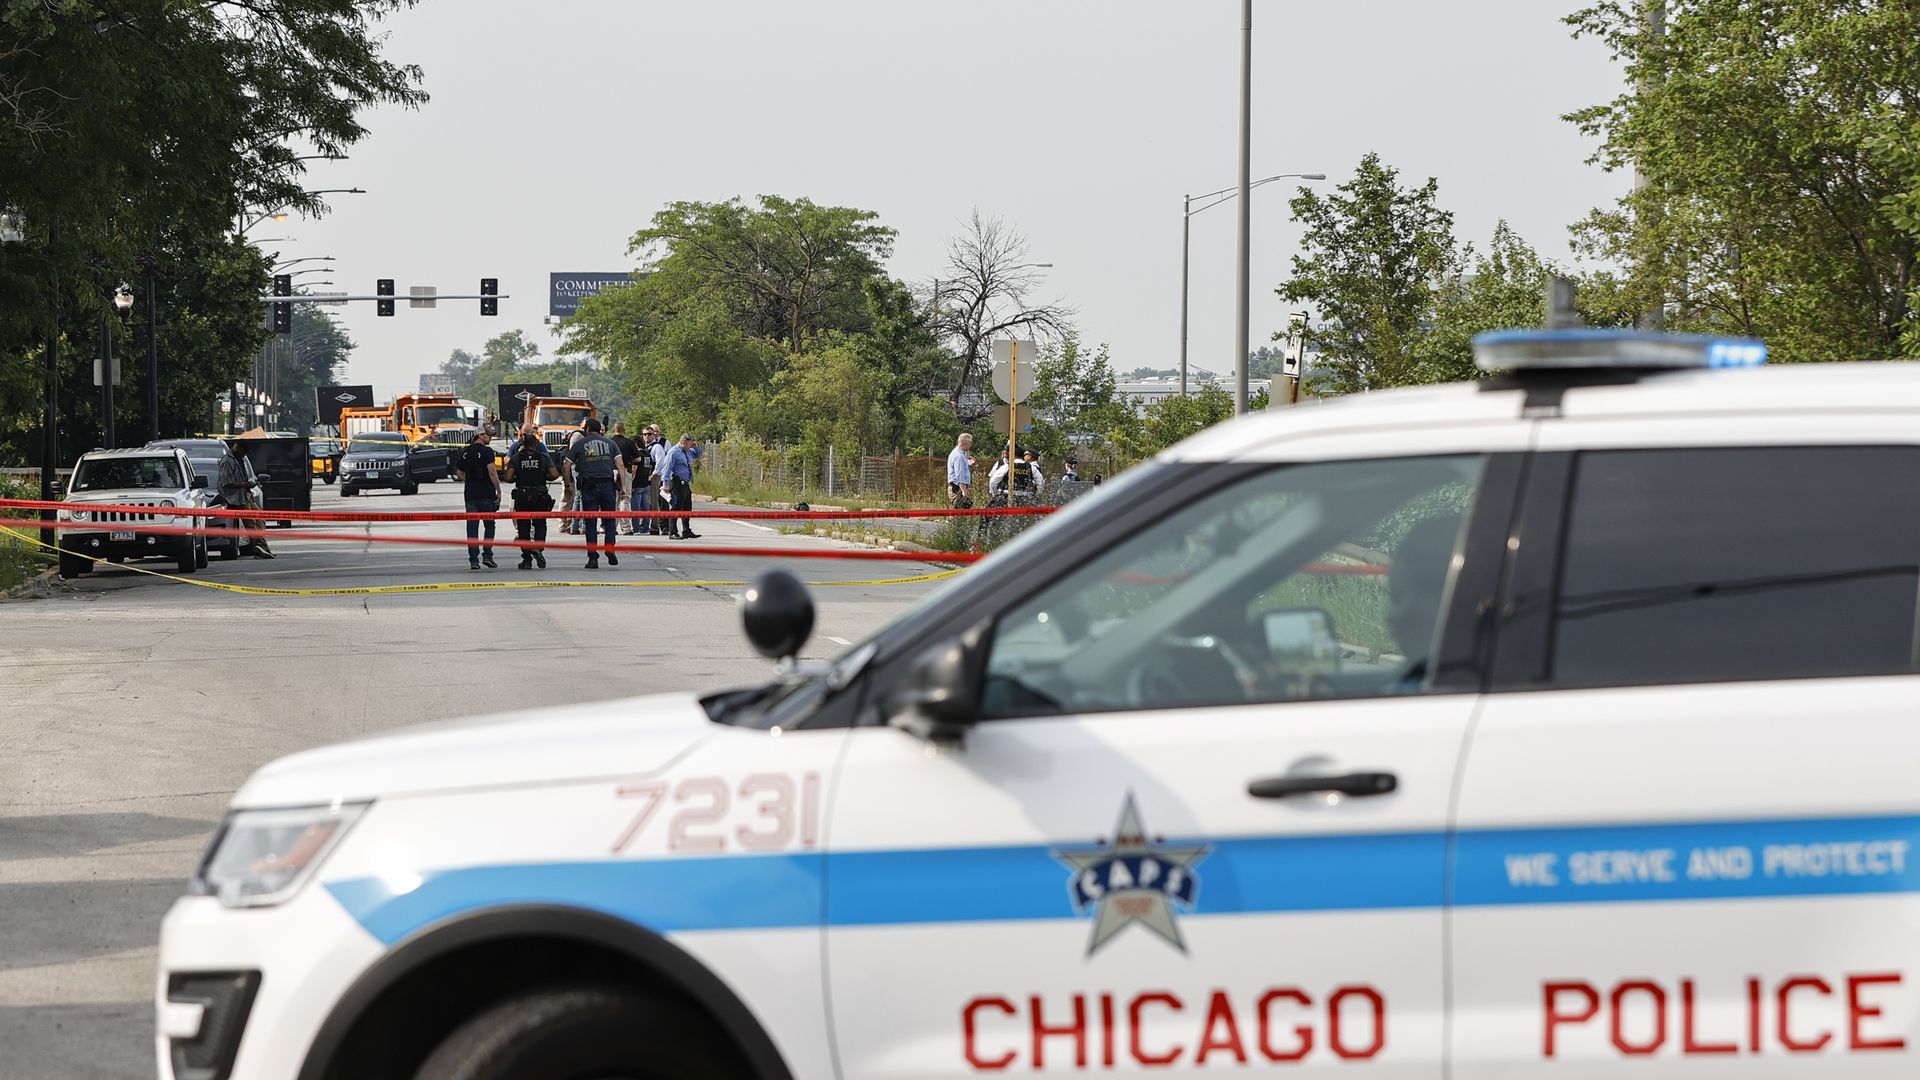 Photo of a Chicago police car parked next to a crime scene that's taped off and has multiple officers standing around